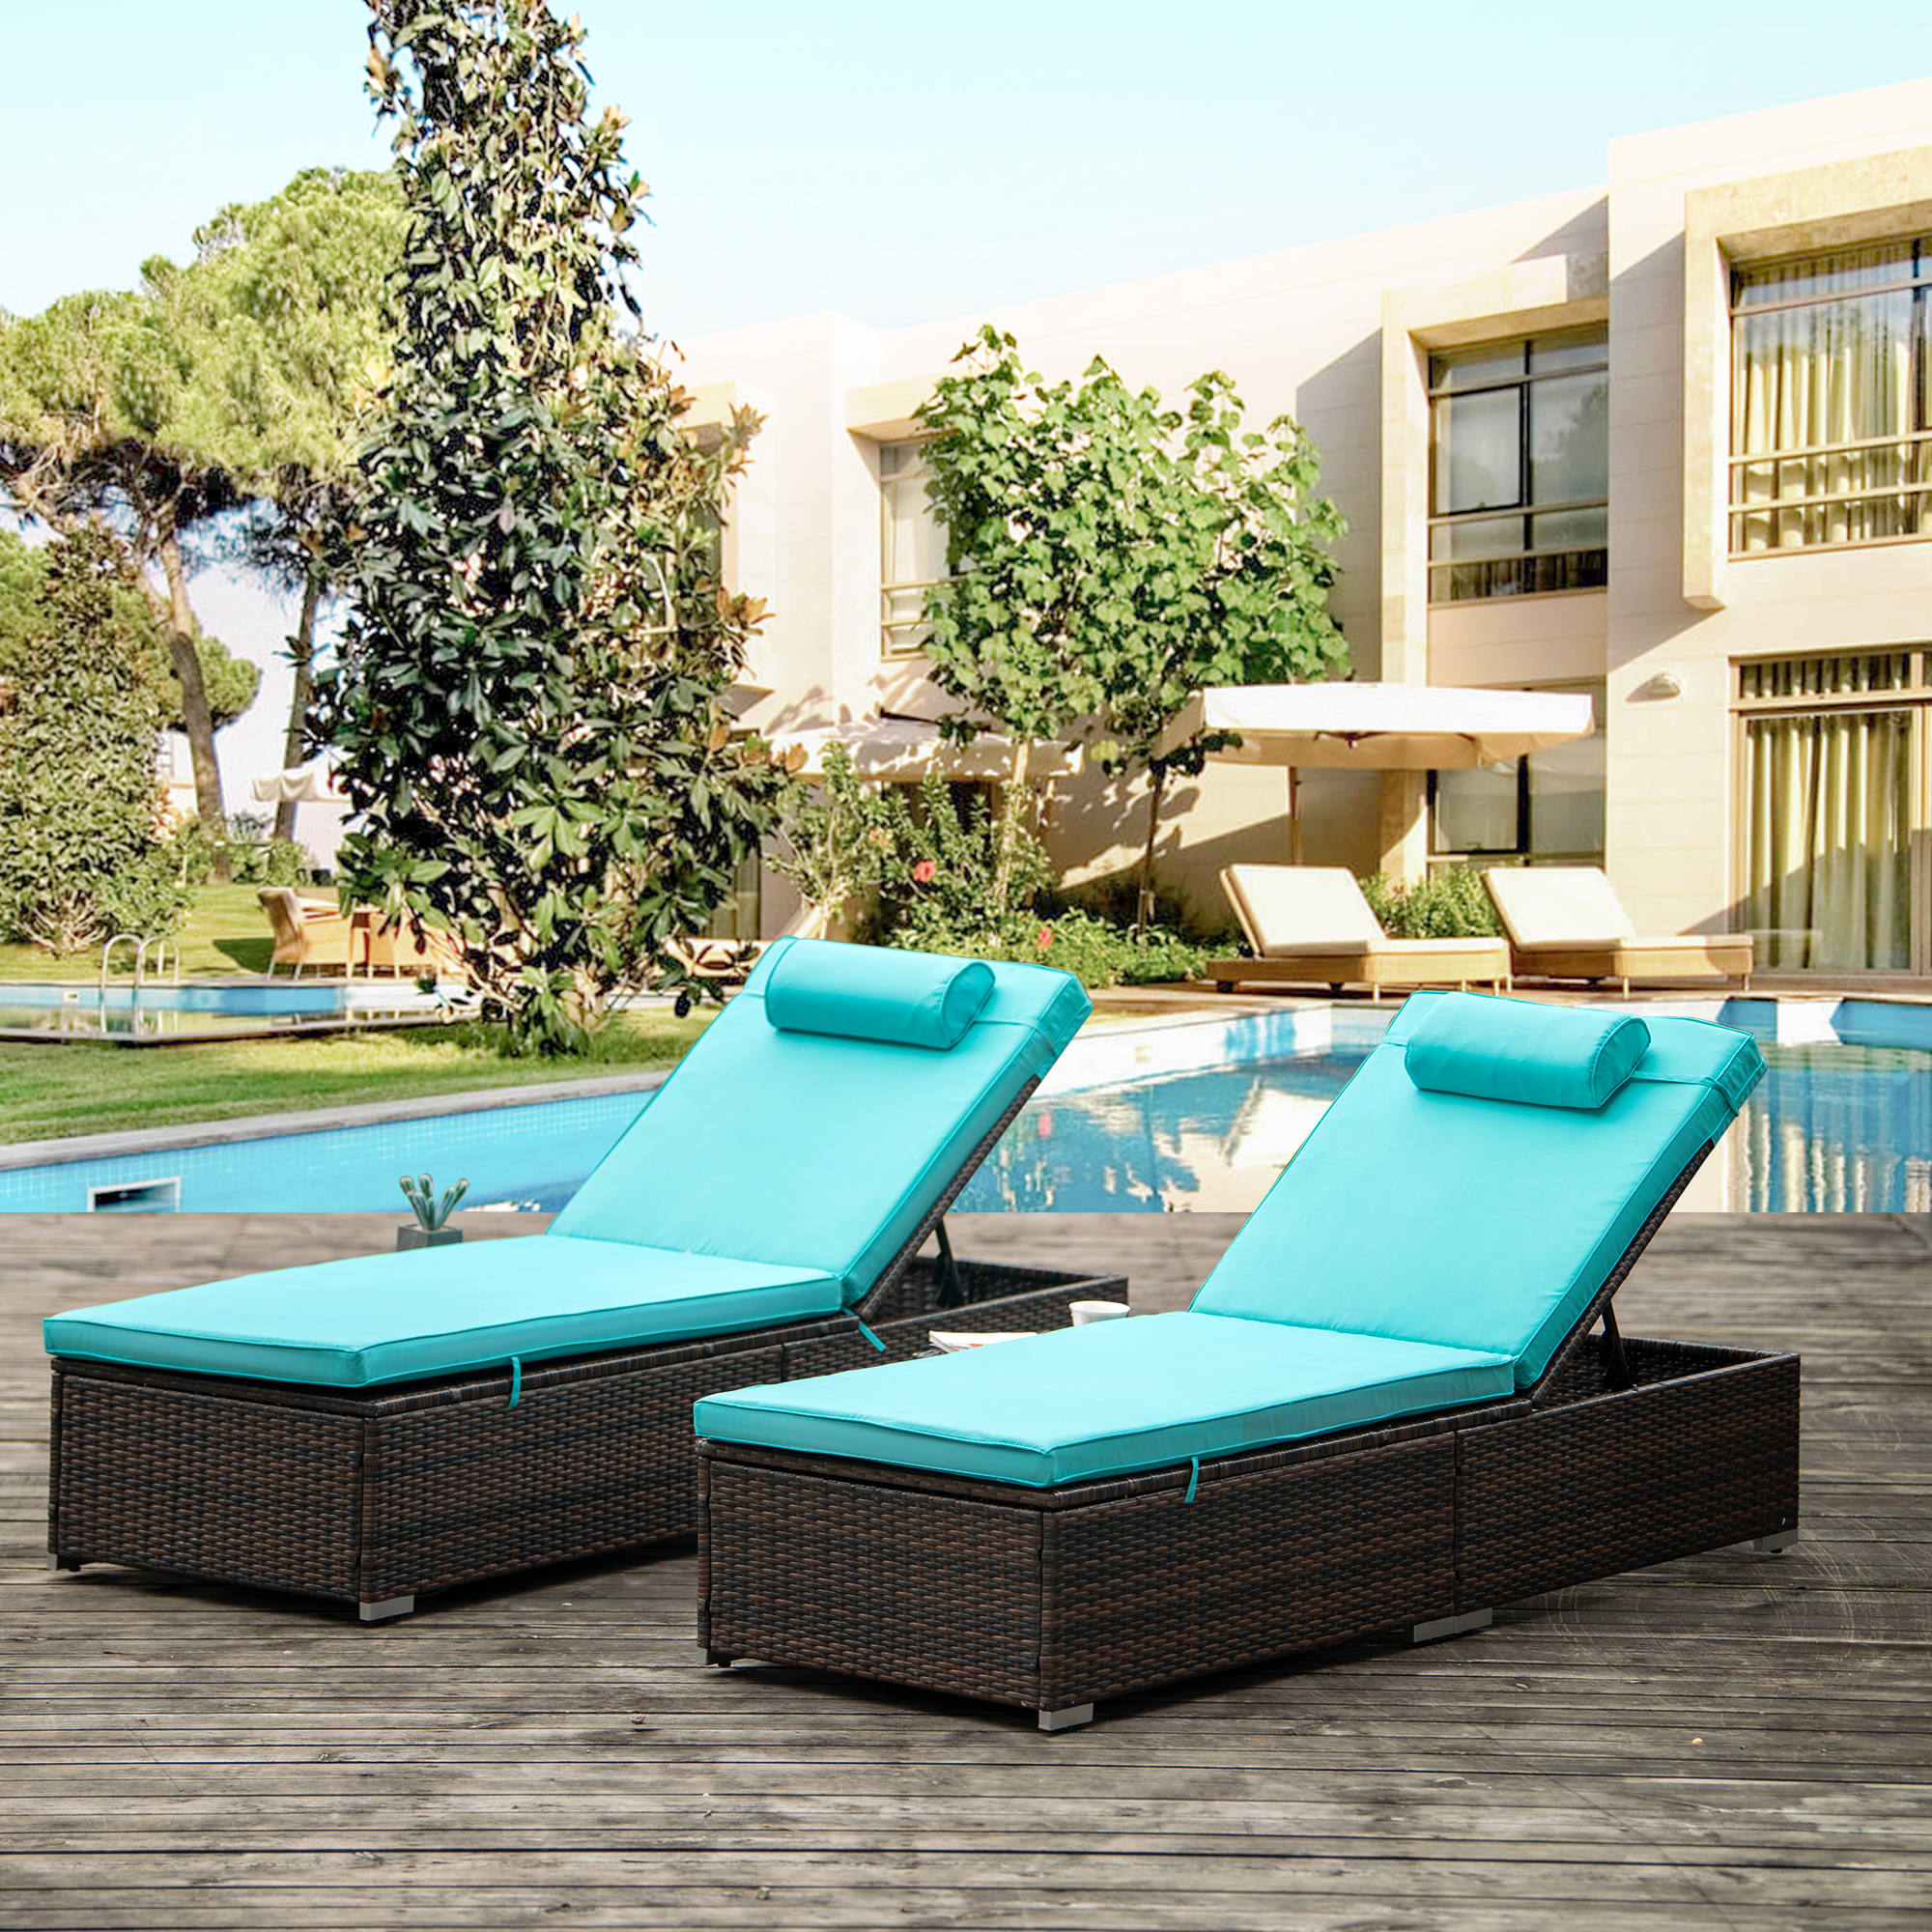 Patio Lounge Chairs Set of 2, Outdoor Chaise Lounges Chairs with with Cup Table, 5 Backrest Angles, and Removable Cushions, PE Rattan Backrest Lounger Chairs Set for Pool Porch Backyard Patio - image 1 of 10